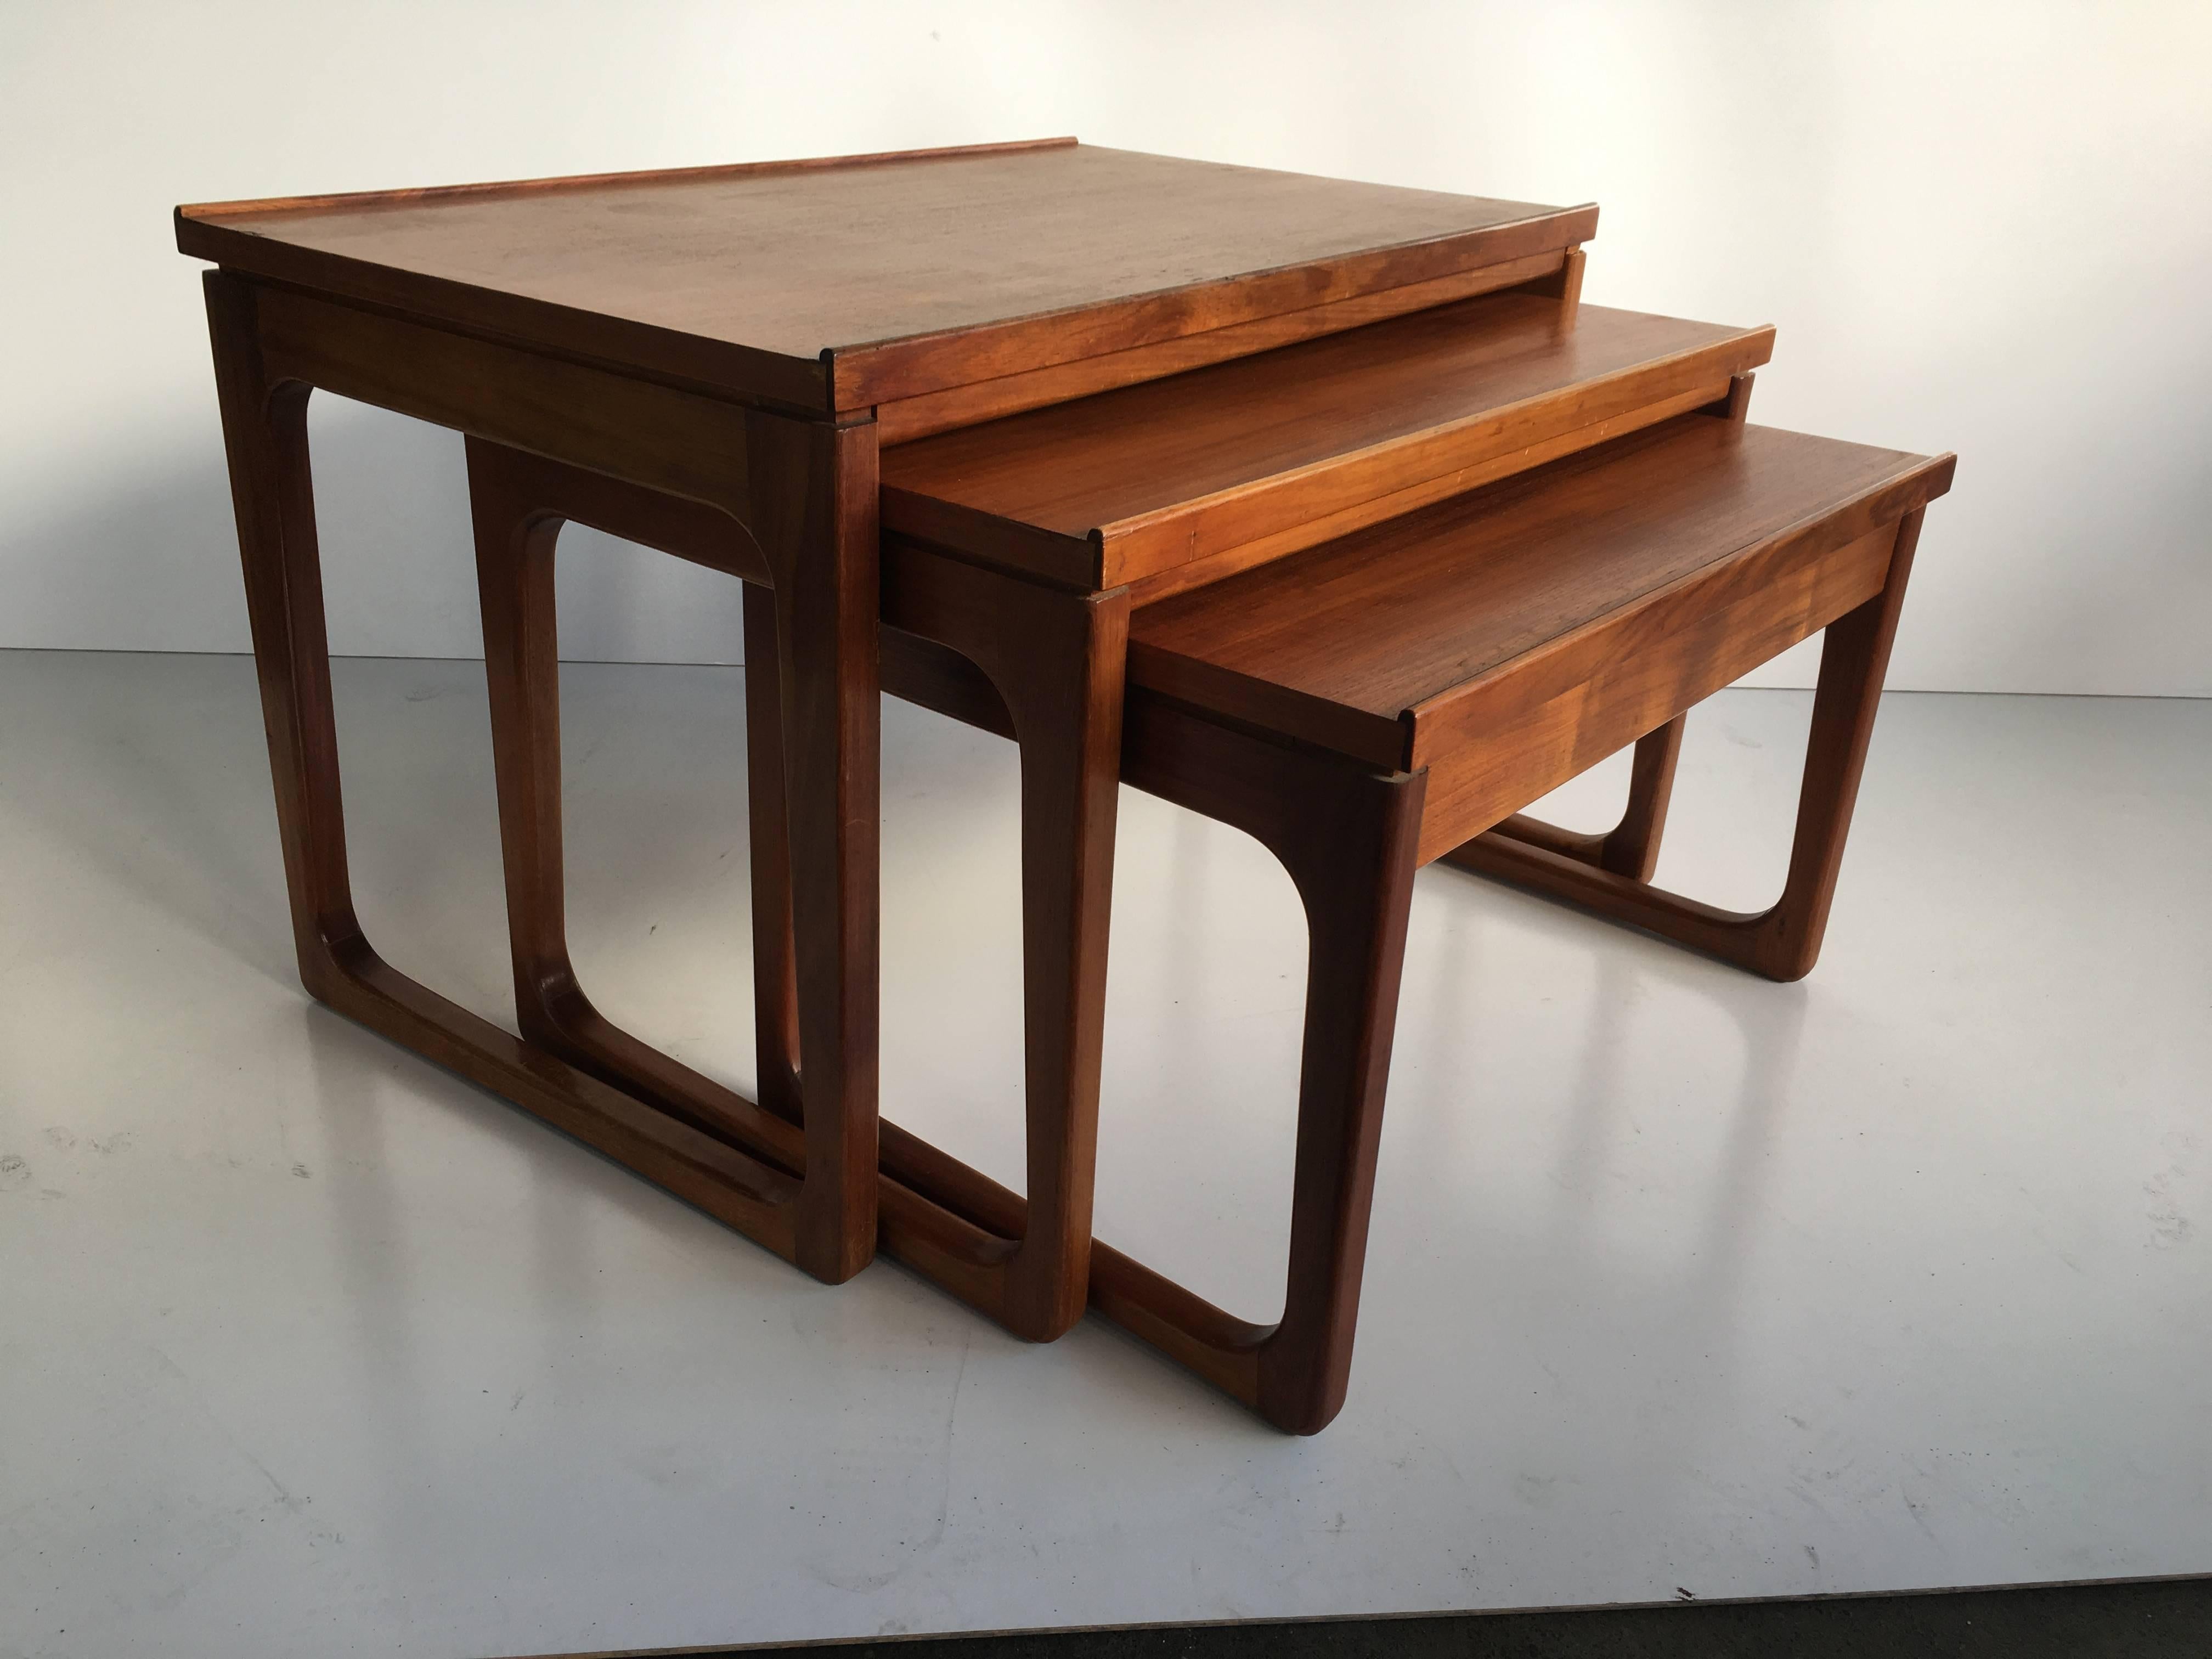 Set of excellent quality nesting tables designed by renowned Australian designer Gerald Easden for maker Module, 1960s.

In very good condition. Elegant sleigh leg design, a beautifully stylish edition to any space and perfect for smaller